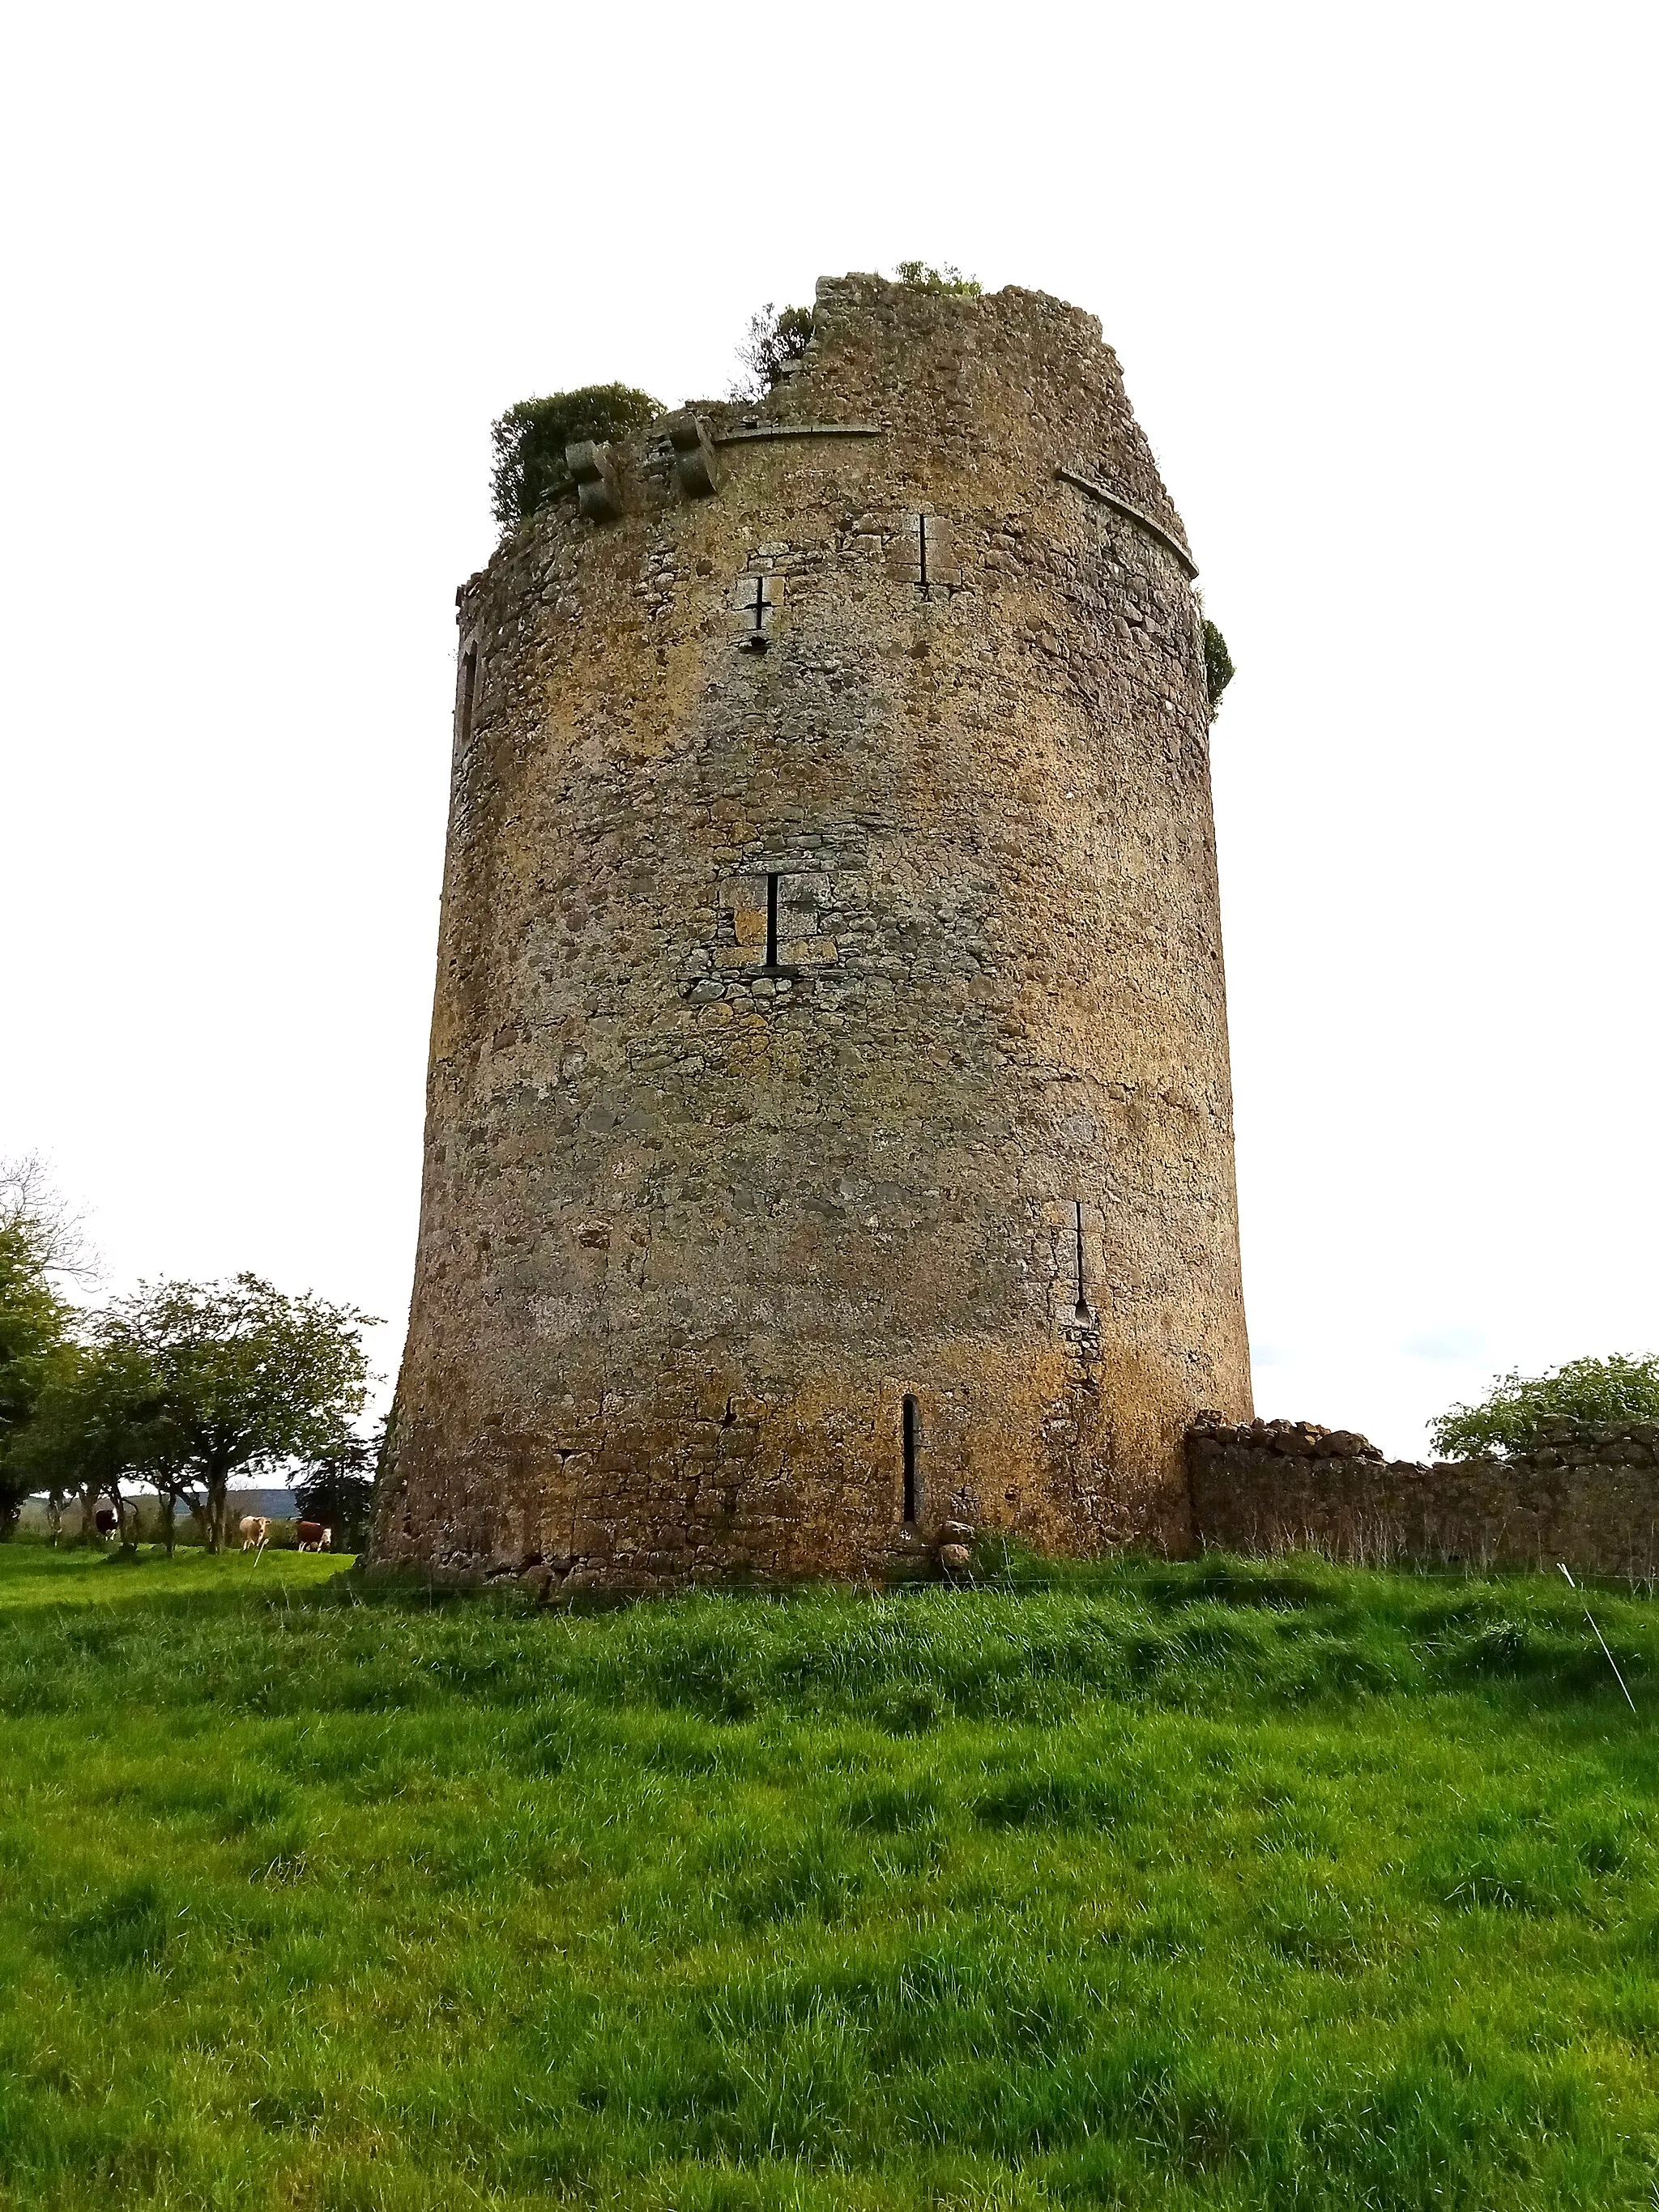 Photo showing: Balief Castle, a rare round tower house near Balief Cross Roads between Freshford and Urlingford in County Kilkenny